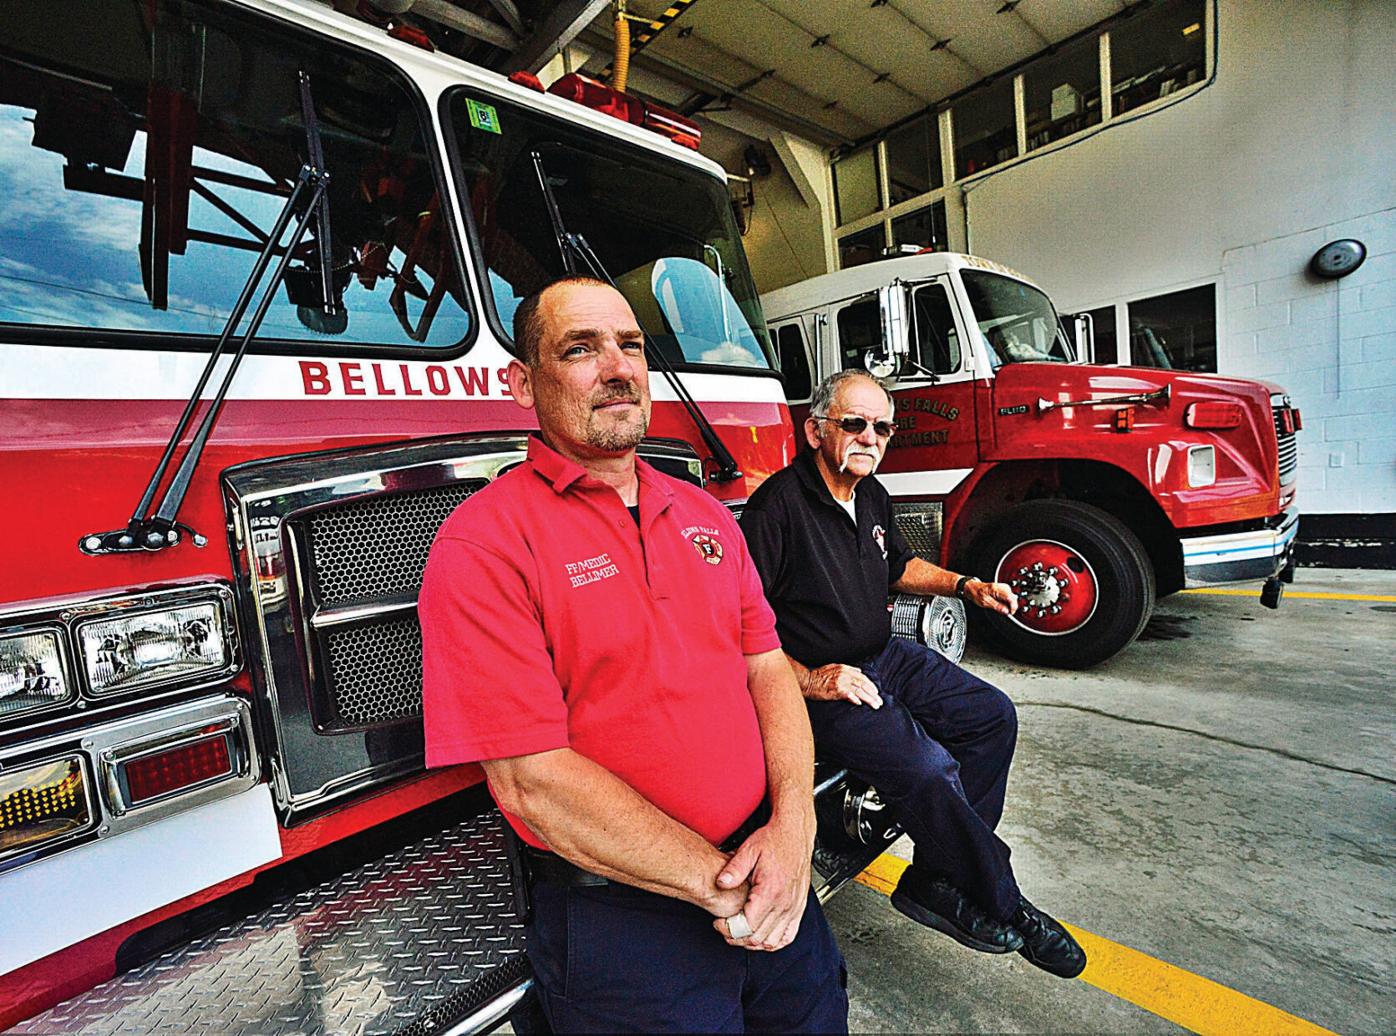 Trustees eliminate all full-time Bellows Falls firefighters